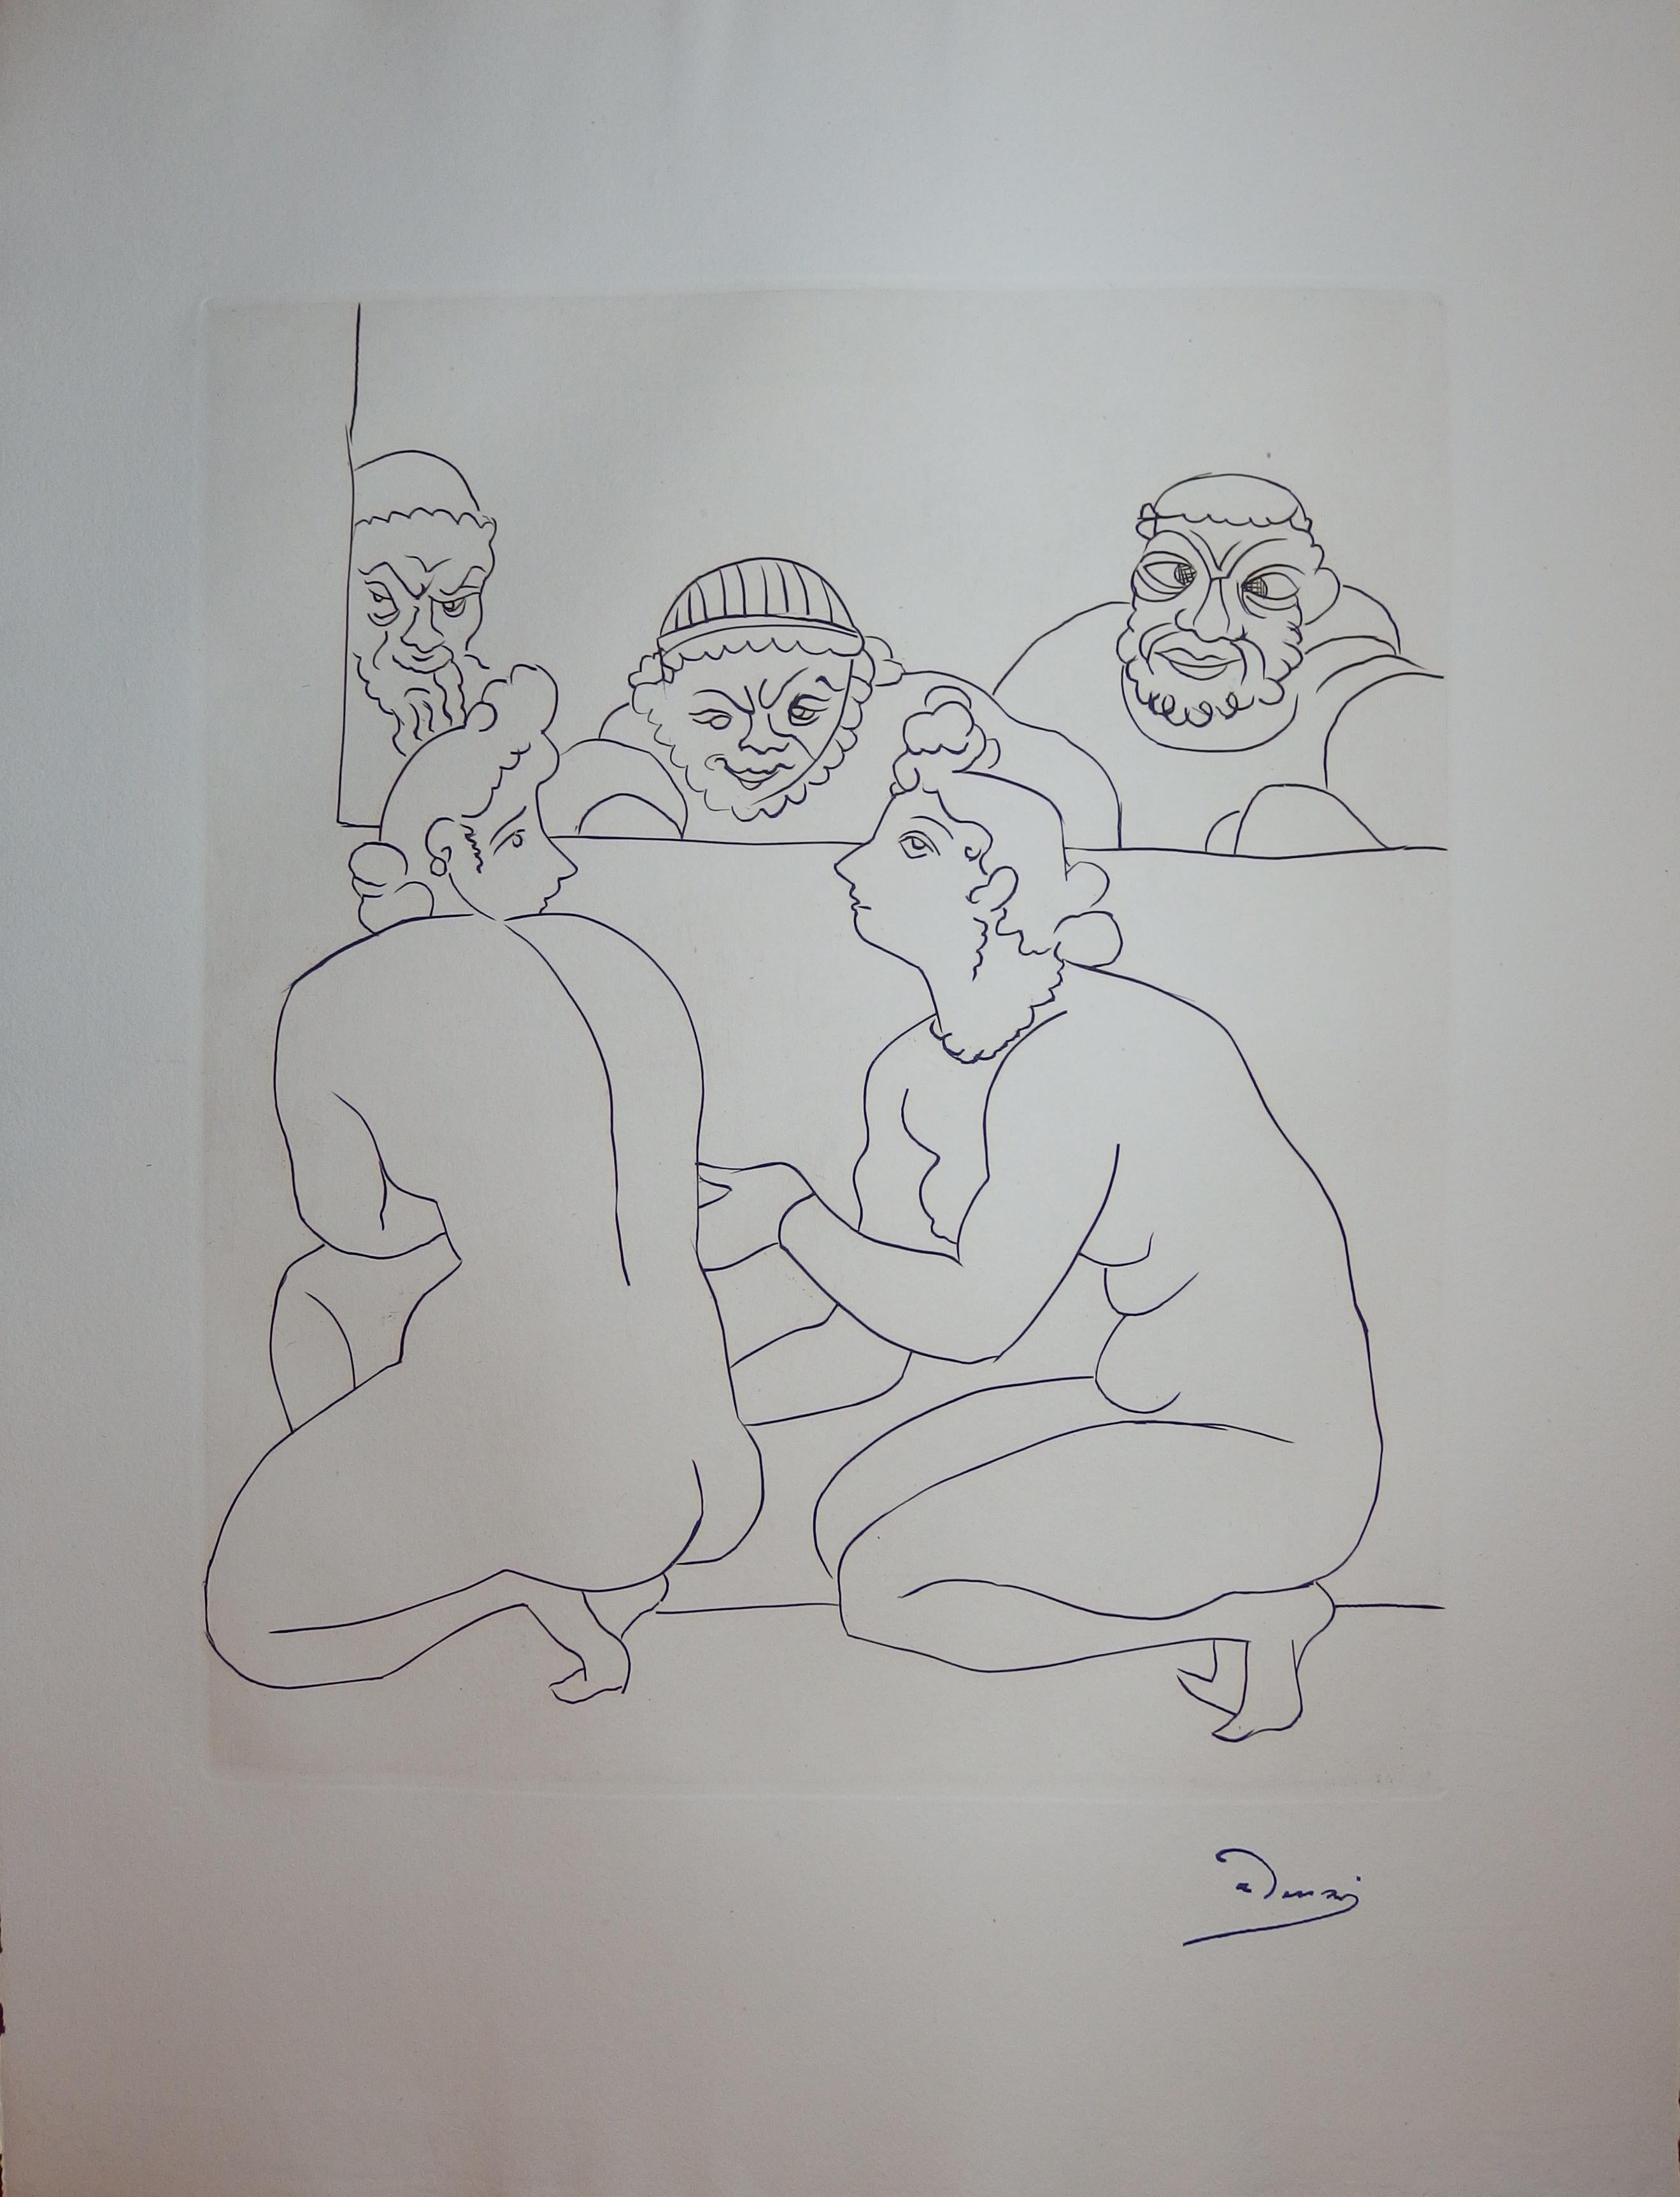 Two Nude Women Discussing with Men - Original etching - 1951